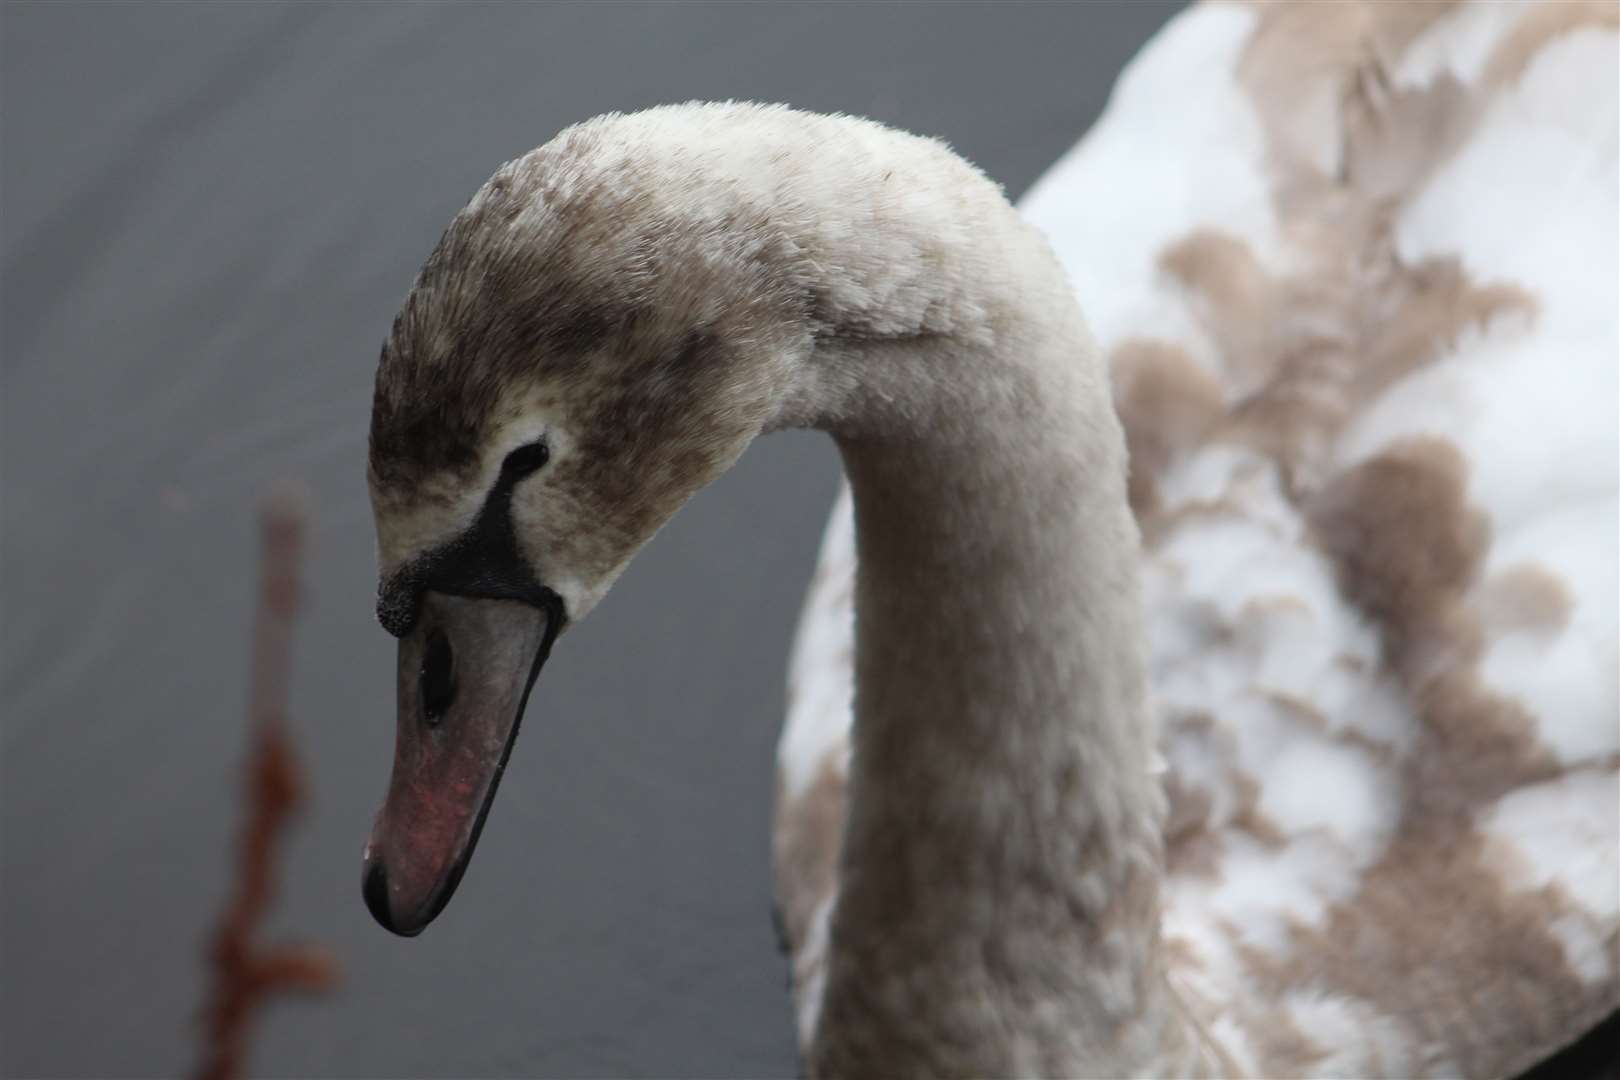 A cygnet poses for the camera.